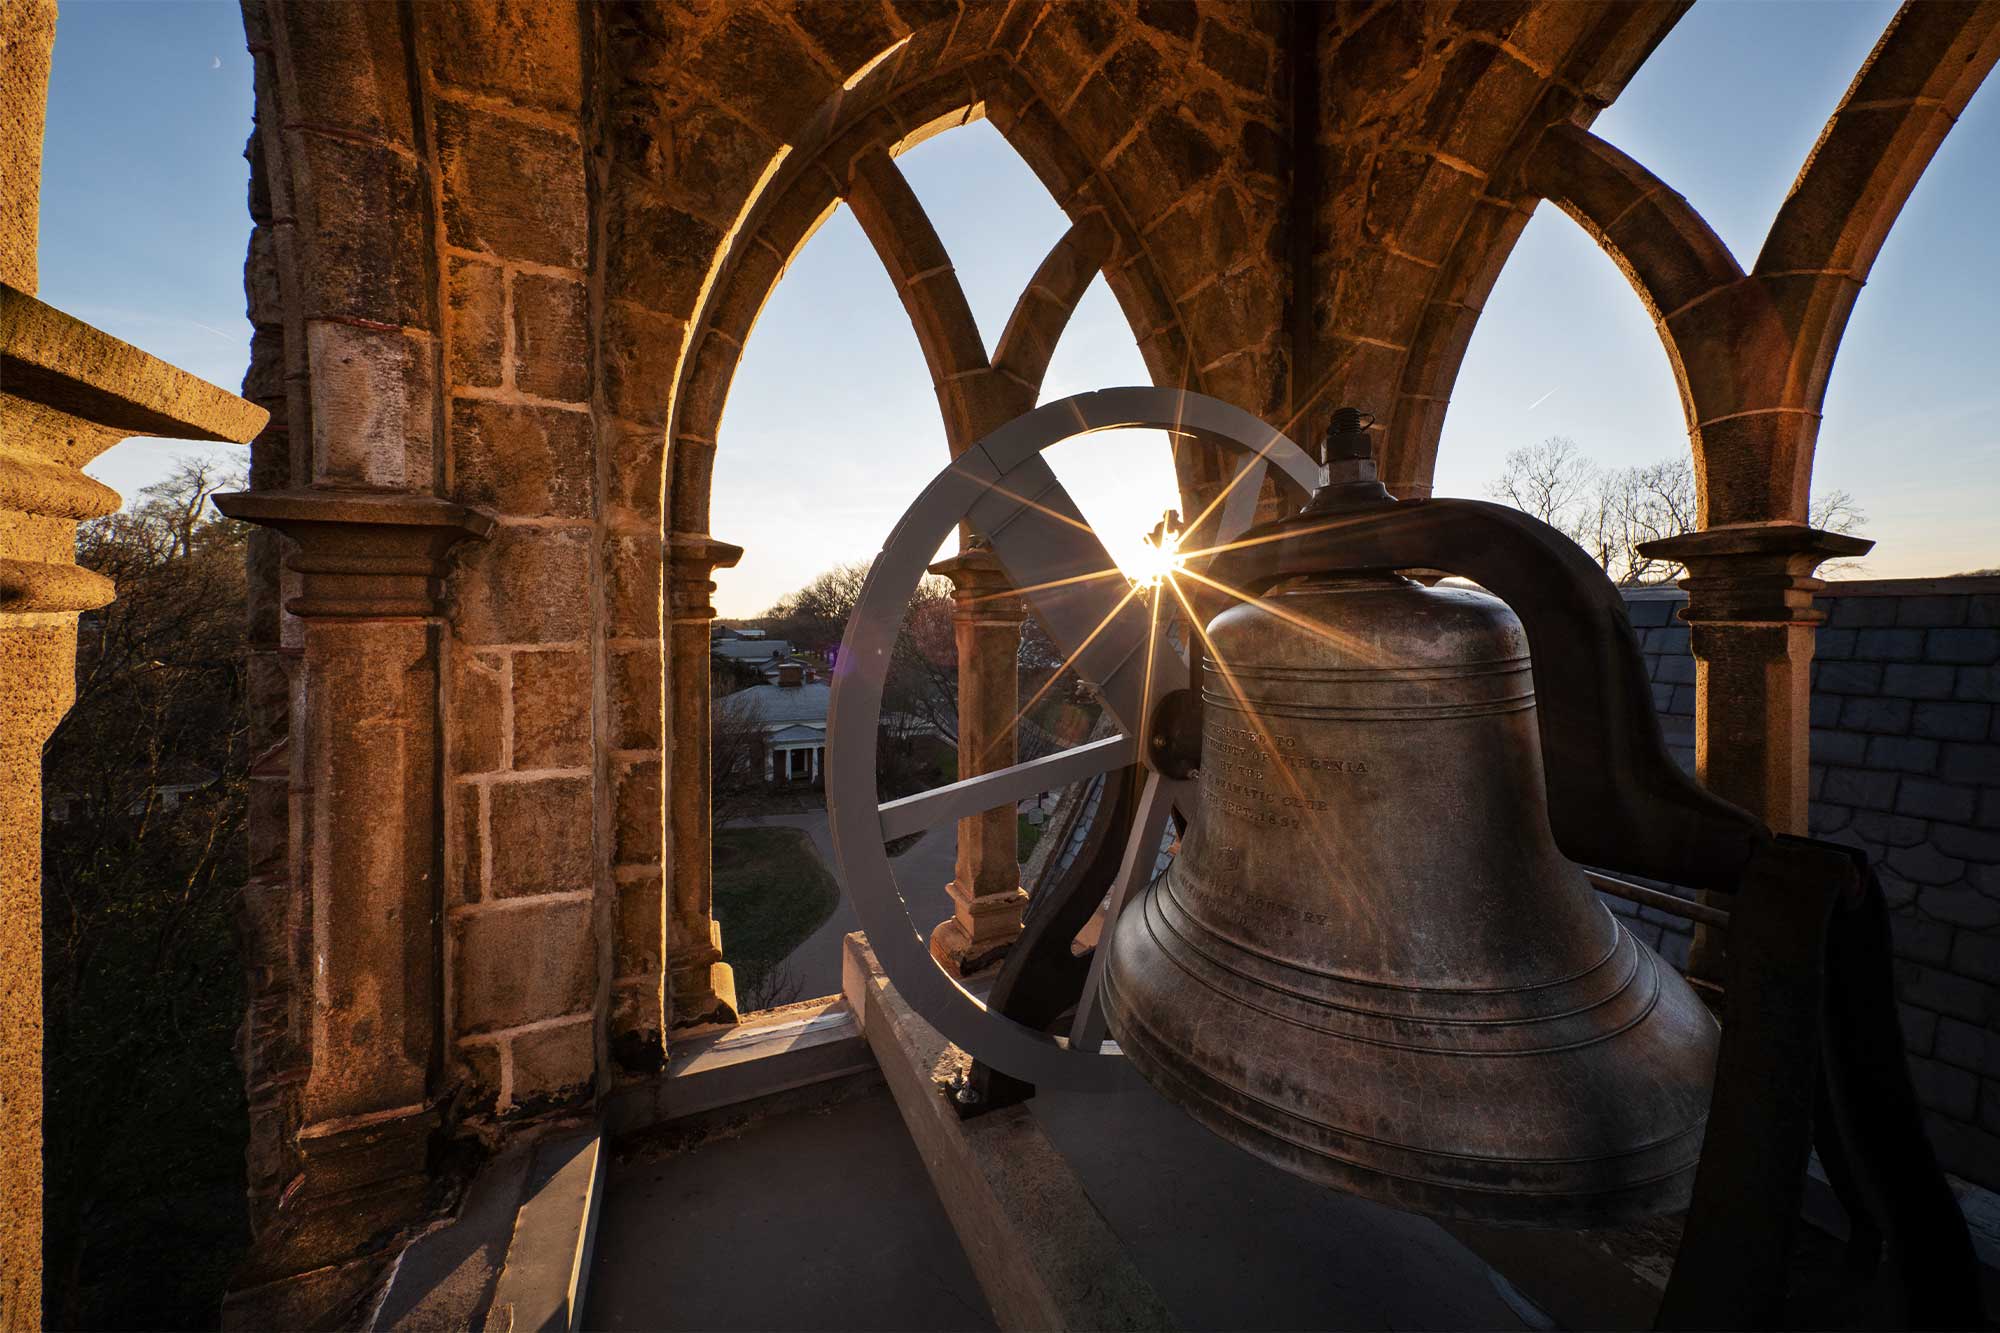 The sun shines from behind the large bell in the tower of the UVA chapel.